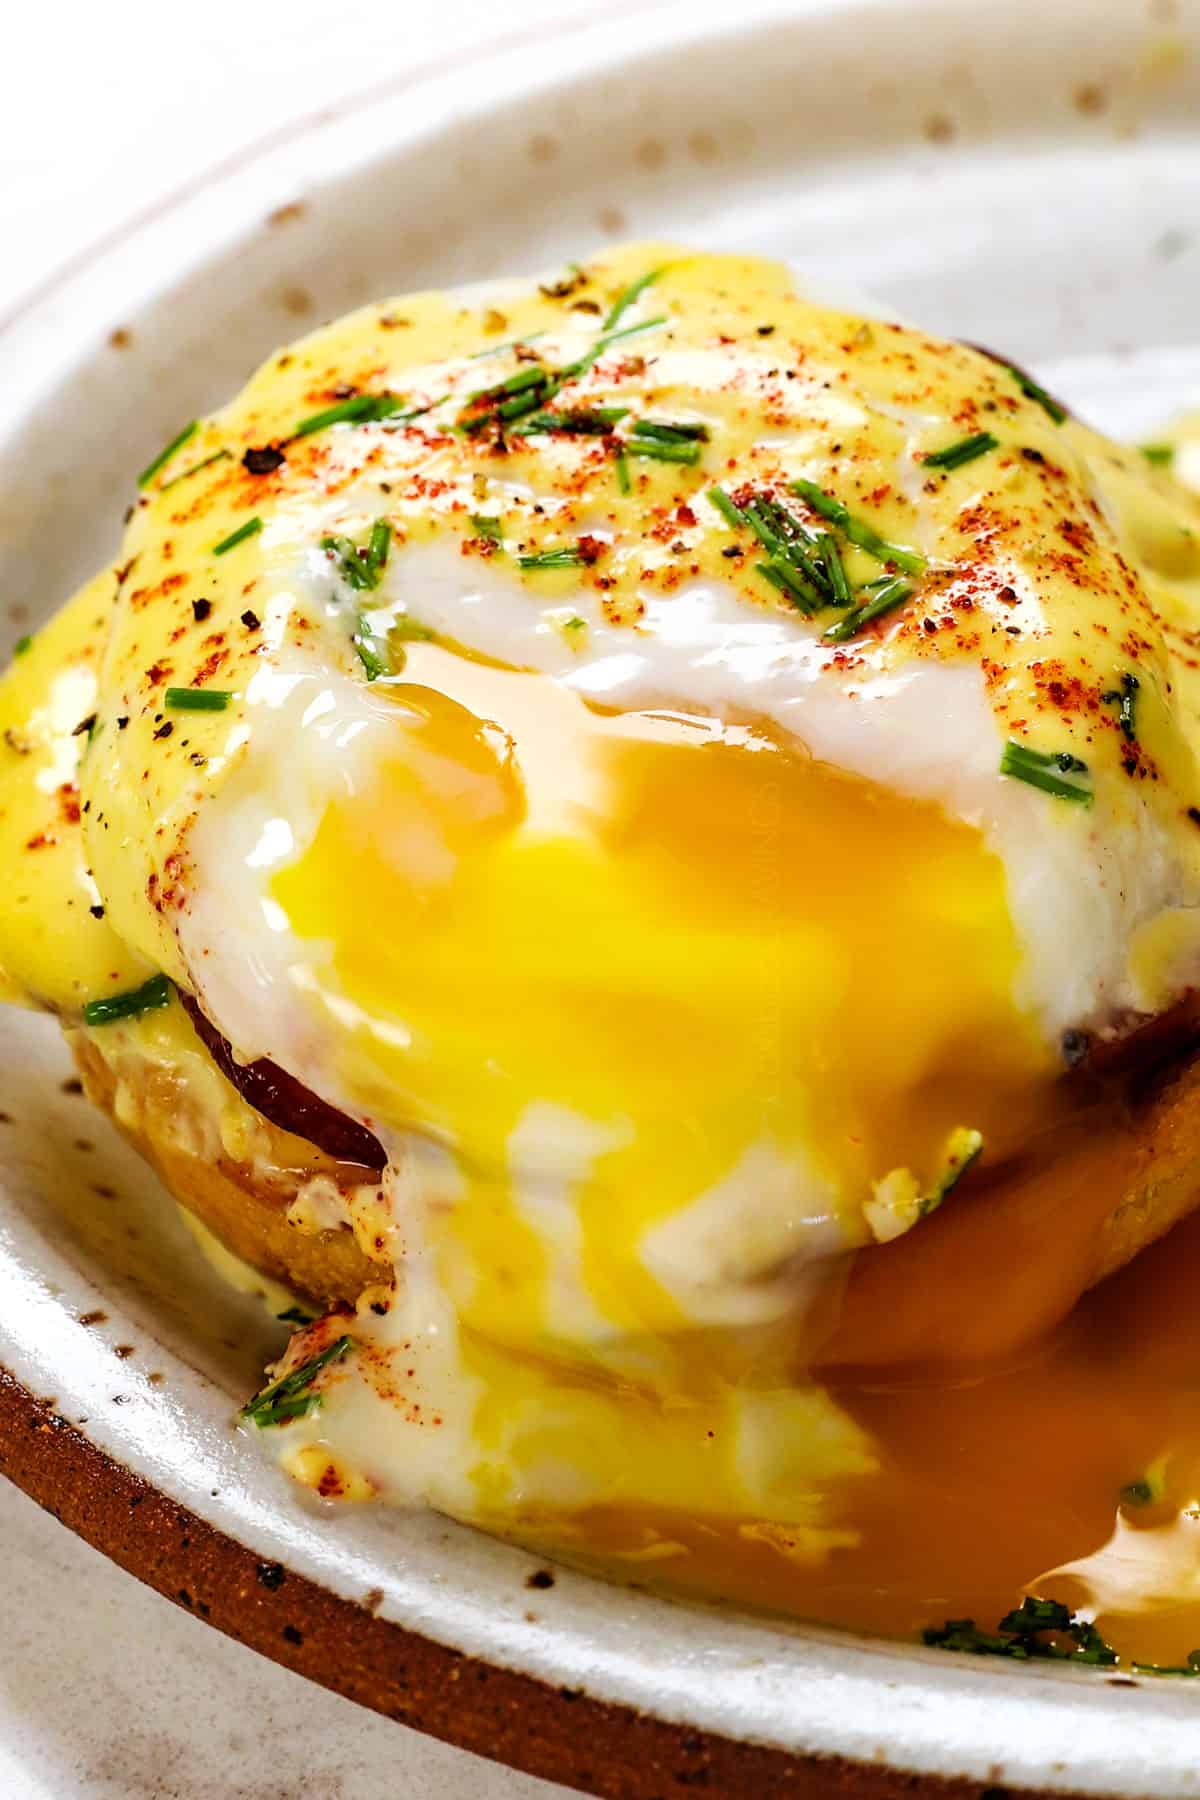 up close of egg benedict recipe with the yolk running on the plate